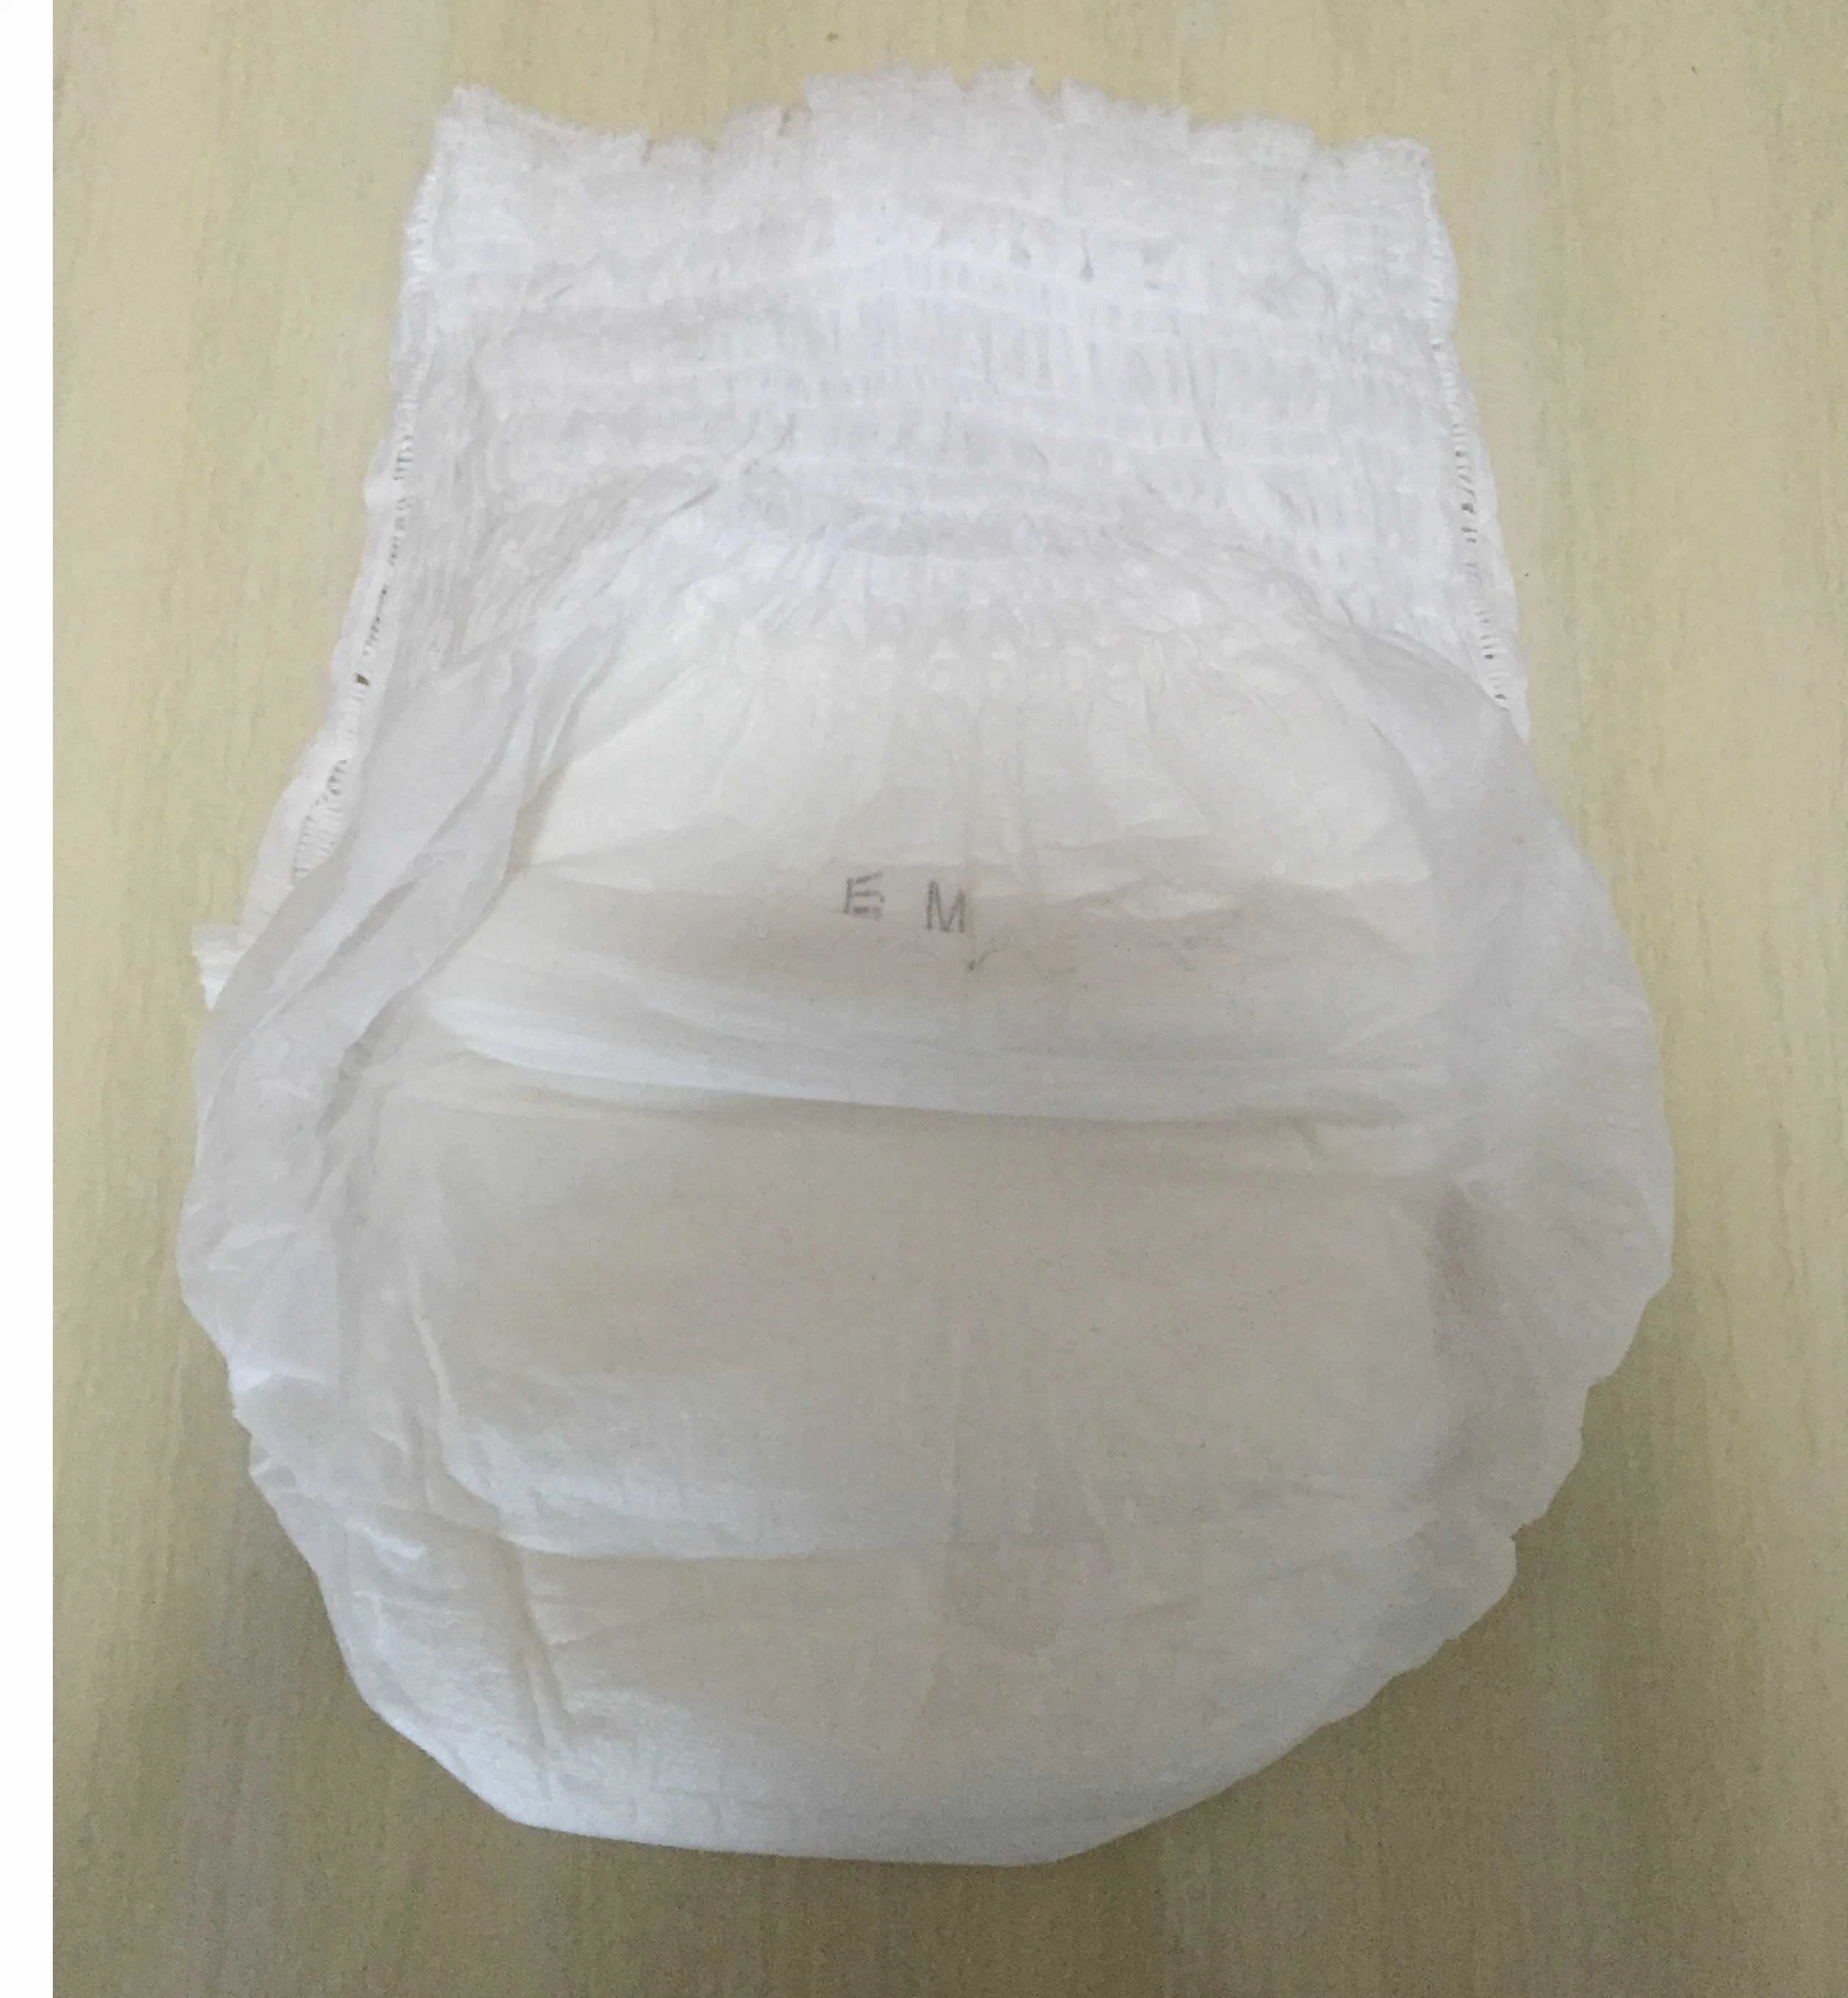 Adult Pull-up Women Incontinence Underwear Maximum Absorbency Adult Products